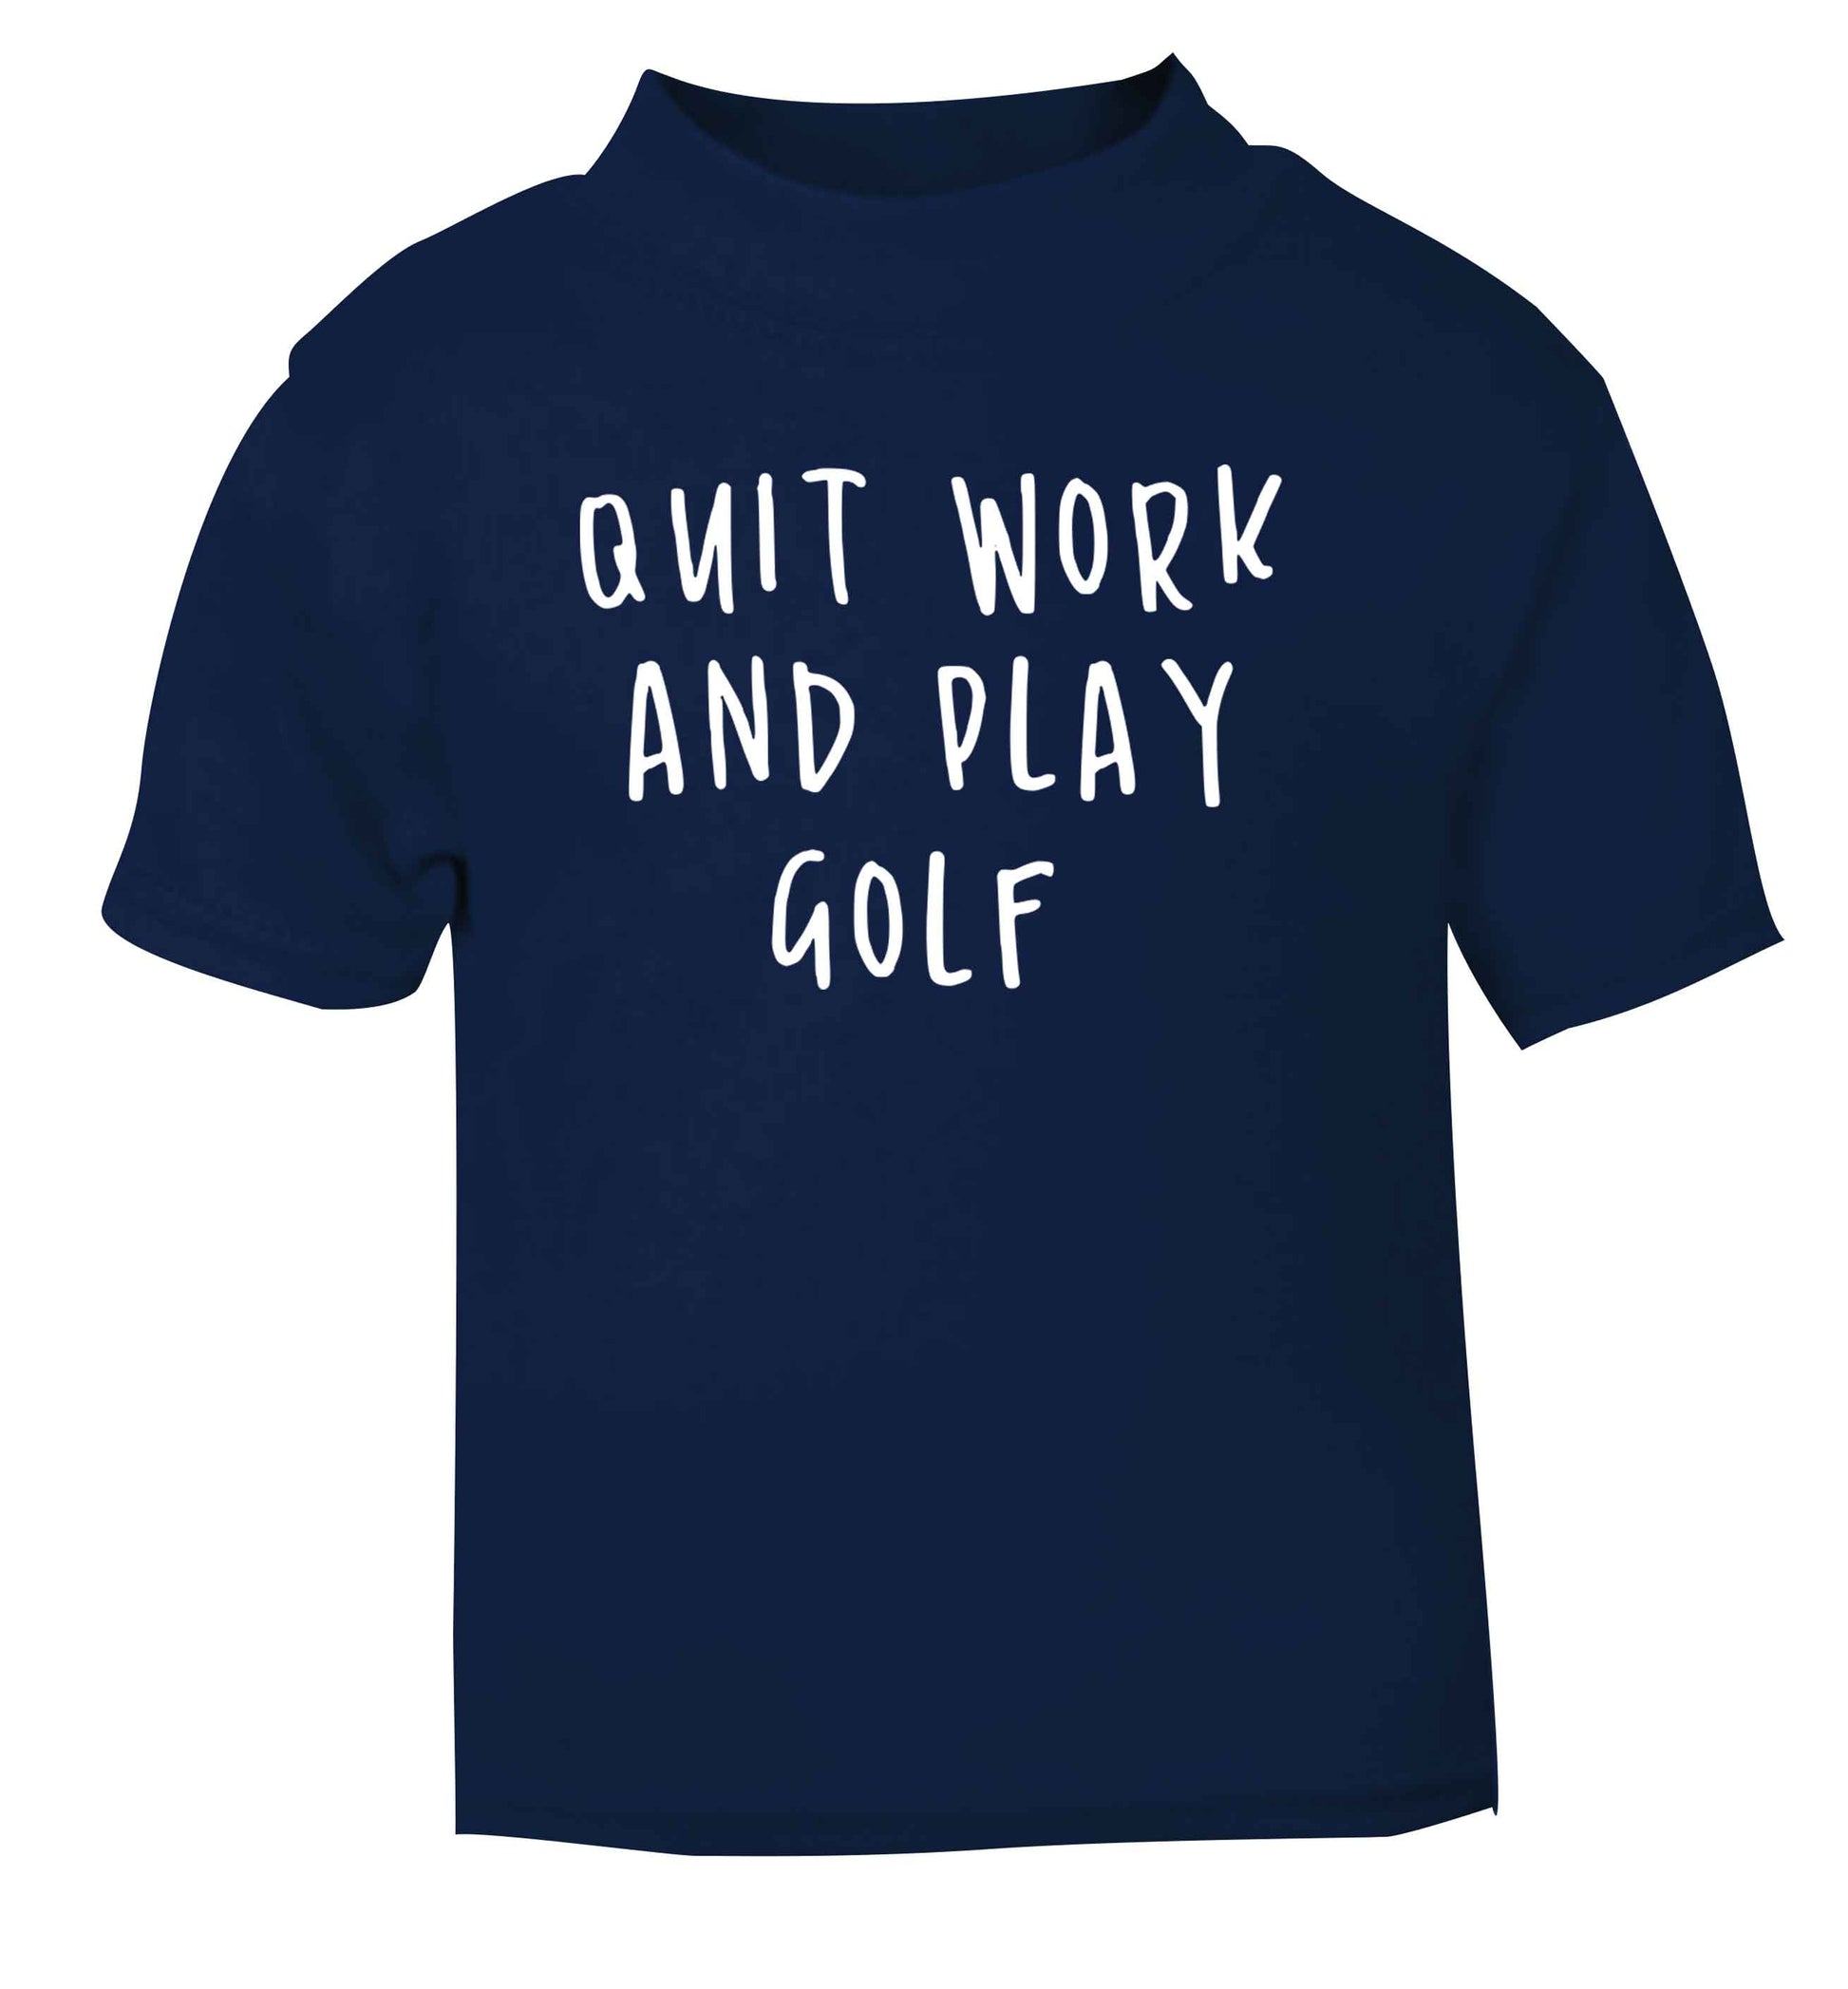 Quit work and play golf navy Baby Toddler Tshirt 2 Years